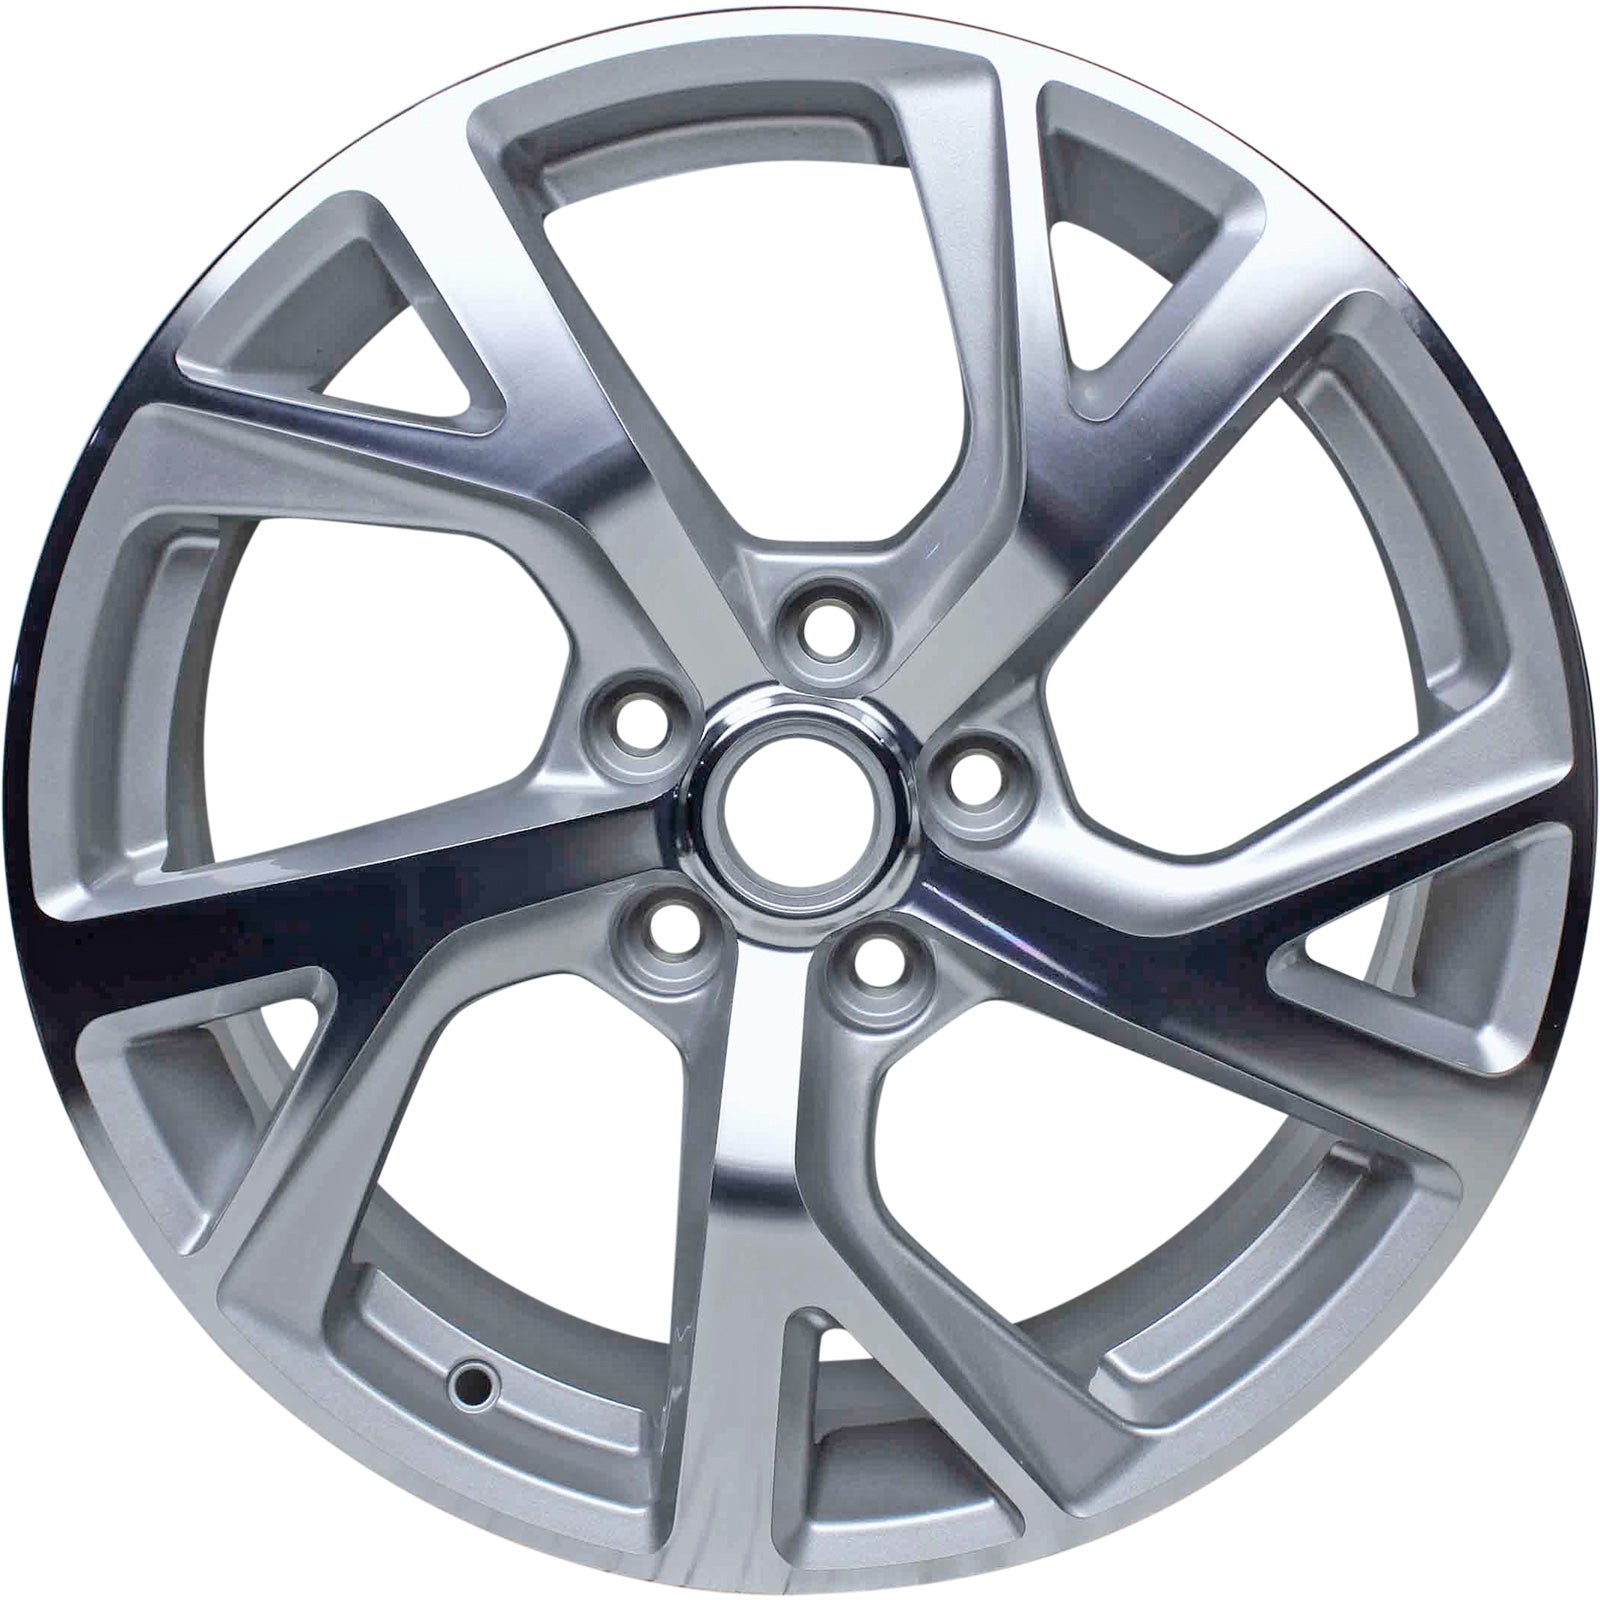 Chevrolet Astra - Specs of rims, tires, PCD, offset for each year